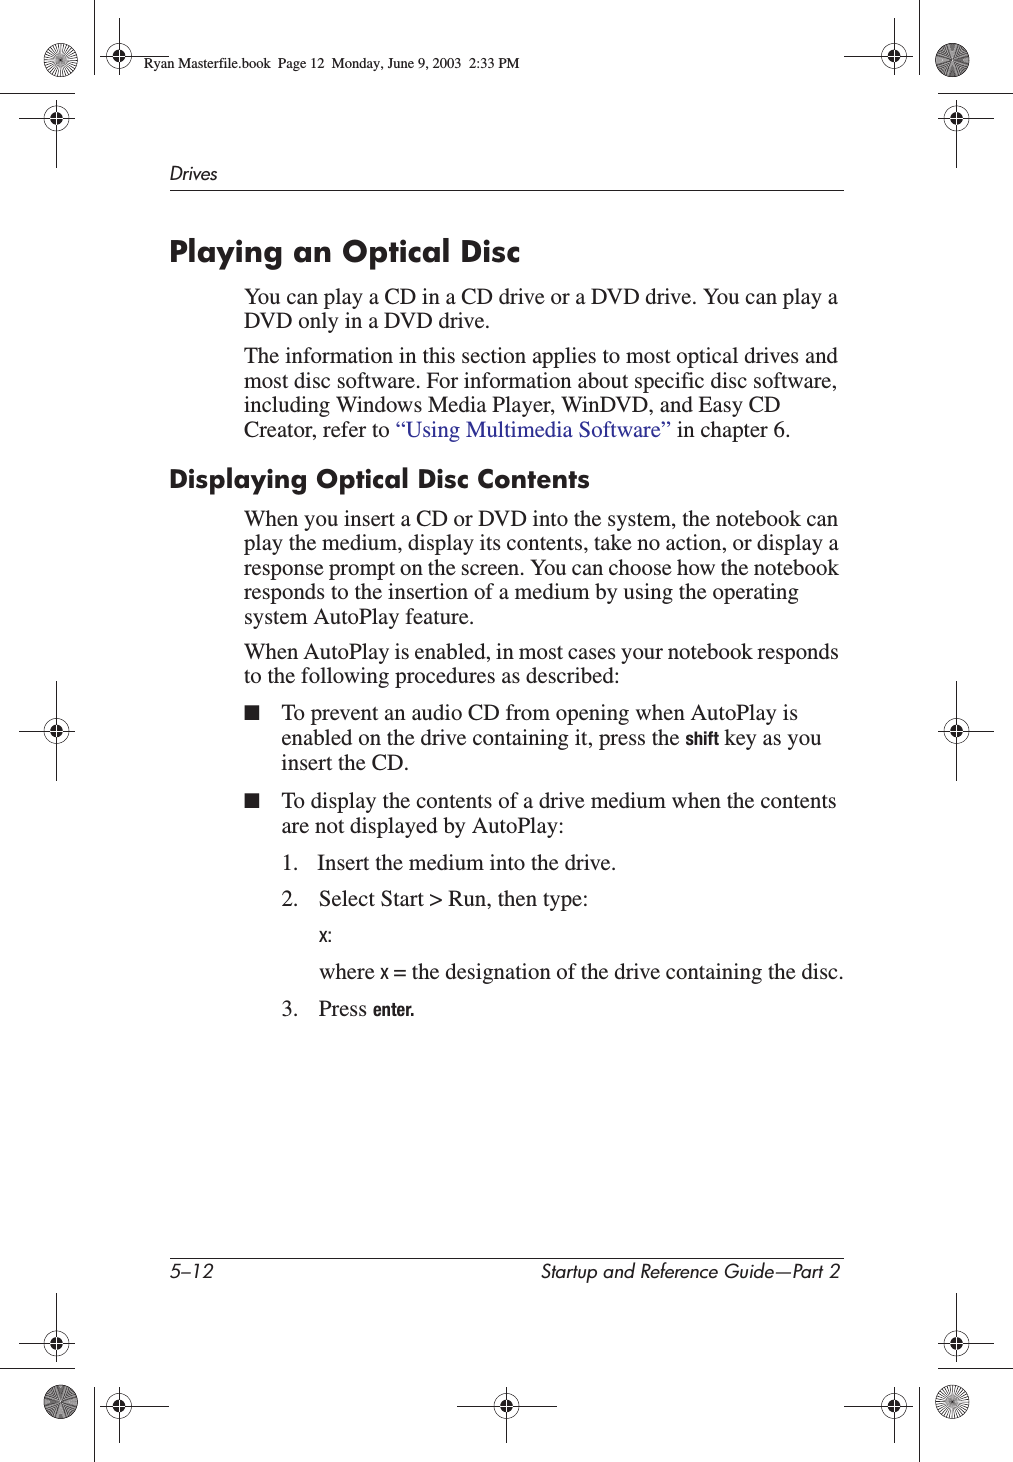 5–12 Startup and Reference Guide—Part 2DrivesPlaying an Optical DiscYou can play a CD in a CD drive or a DVD drive. You can play a DVD only in a DVD drive.The information in this section applies to most optical drives and most disc software. For information about specific disc software, including Windows Media Player, WinDVD, and Easy CD Creator, refer to “Using Multimedia Software” in chapter 6.Displaying Optical Disc ContentsWhen you insert a CD or DVD into the system, the notebook can play the medium, display its contents, take no action, or display a response prompt on the screen. You can choose how the notebook responds to the insertion of a medium by using the operating system AutoPlay feature. When AutoPlay is enabled, in most cases your notebook responds to the following procedures as described:■To prevent an audio CD from opening when AutoPlay is enabled on the drive containing it, press the shift key as you insert the CD.■To display the contents of a drive medium when the contents are not displayed by AutoPlay:1. Insert the medium into the drive.2. Select Start &gt; Run, then type:x:where x= the designation of the drive containing the disc.3. Press enter.Ryan Masterfile.book  Page 12  Monday, June 9, 2003  2:33 PM